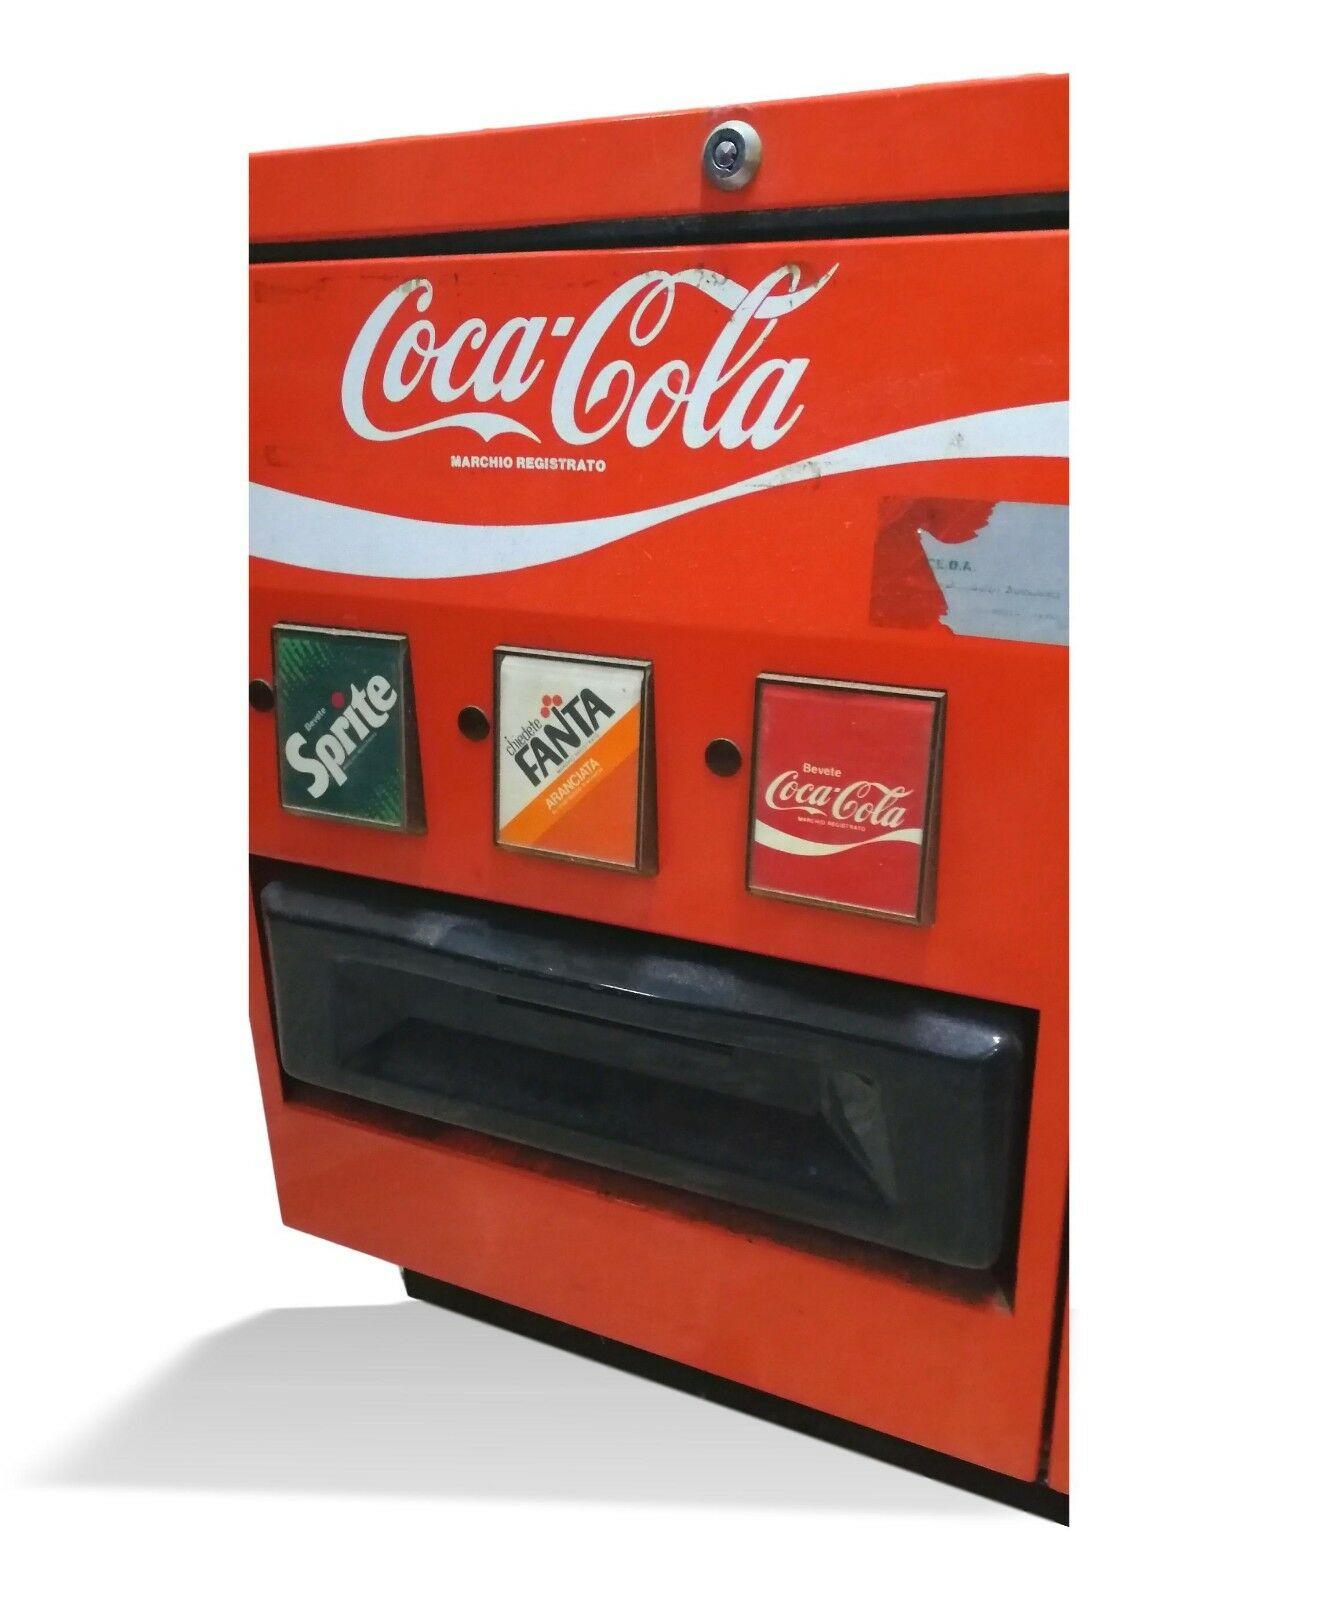 Metal Refrigerated Dispenser of Coca Cola, Fanta and Sprite Cans, 1970s